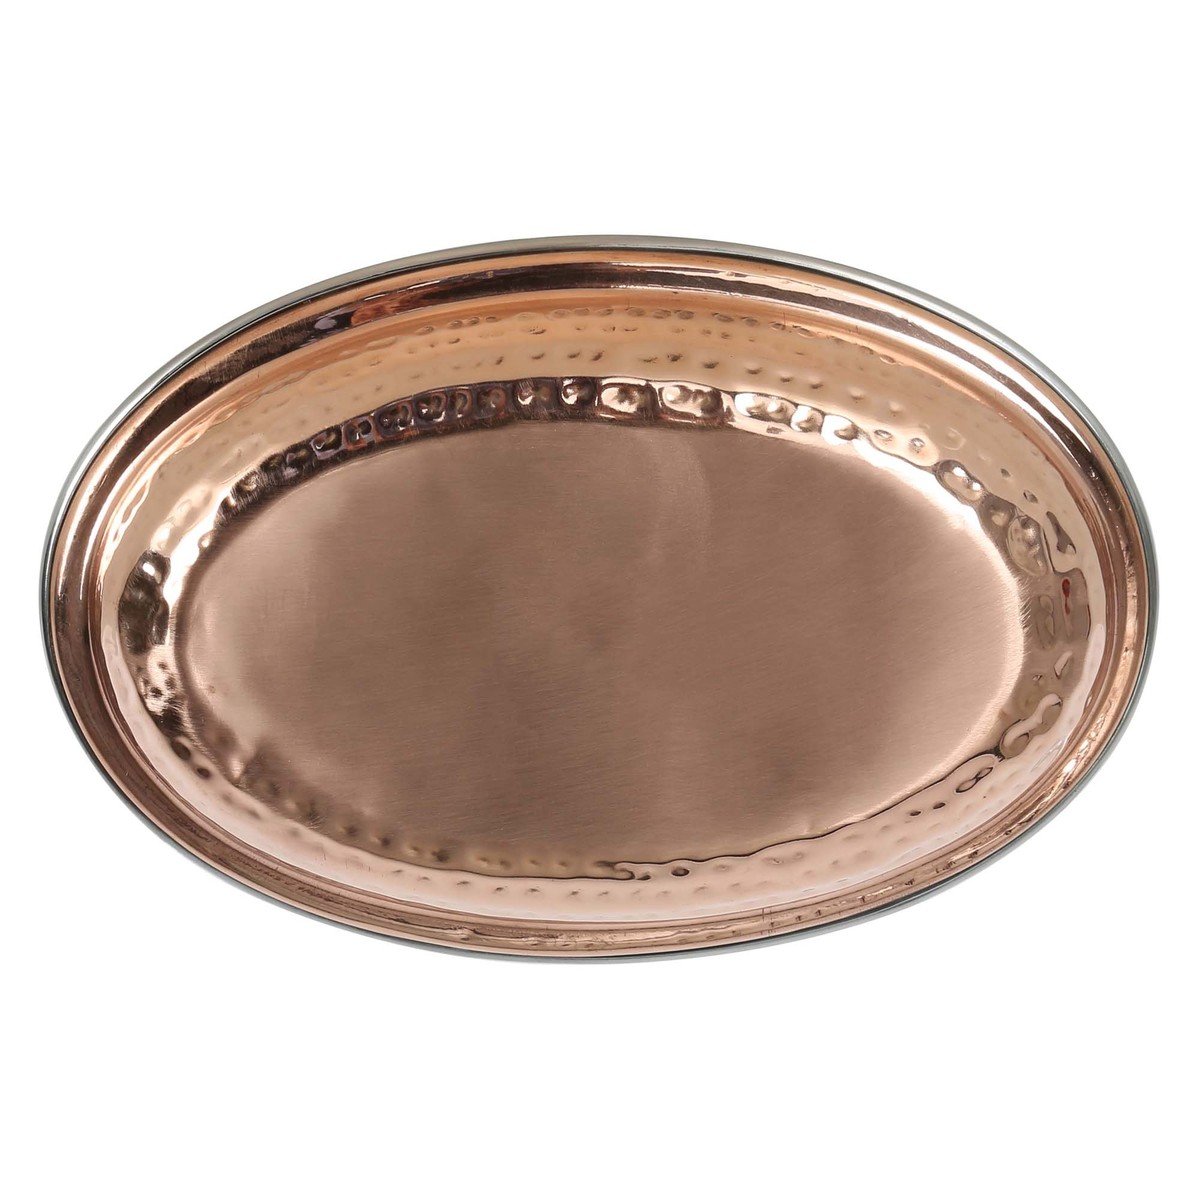 Chefline Double Wall Copper Oval Curry Dish 18.5cm